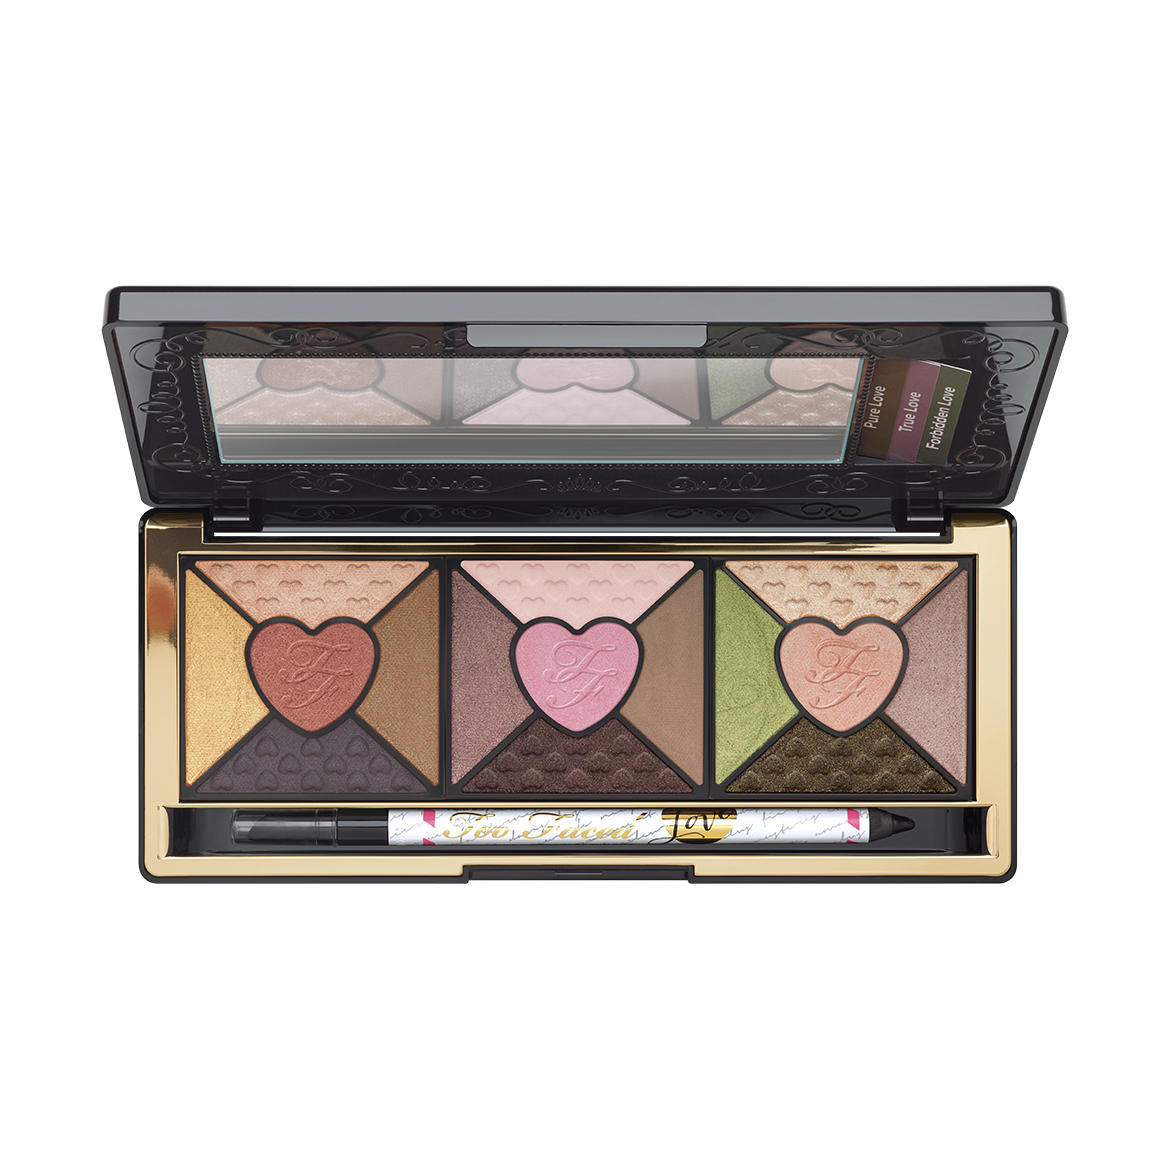 Too Faced Love Passionately Pretty Eyeshadow Palette (Missing Eyeliner)